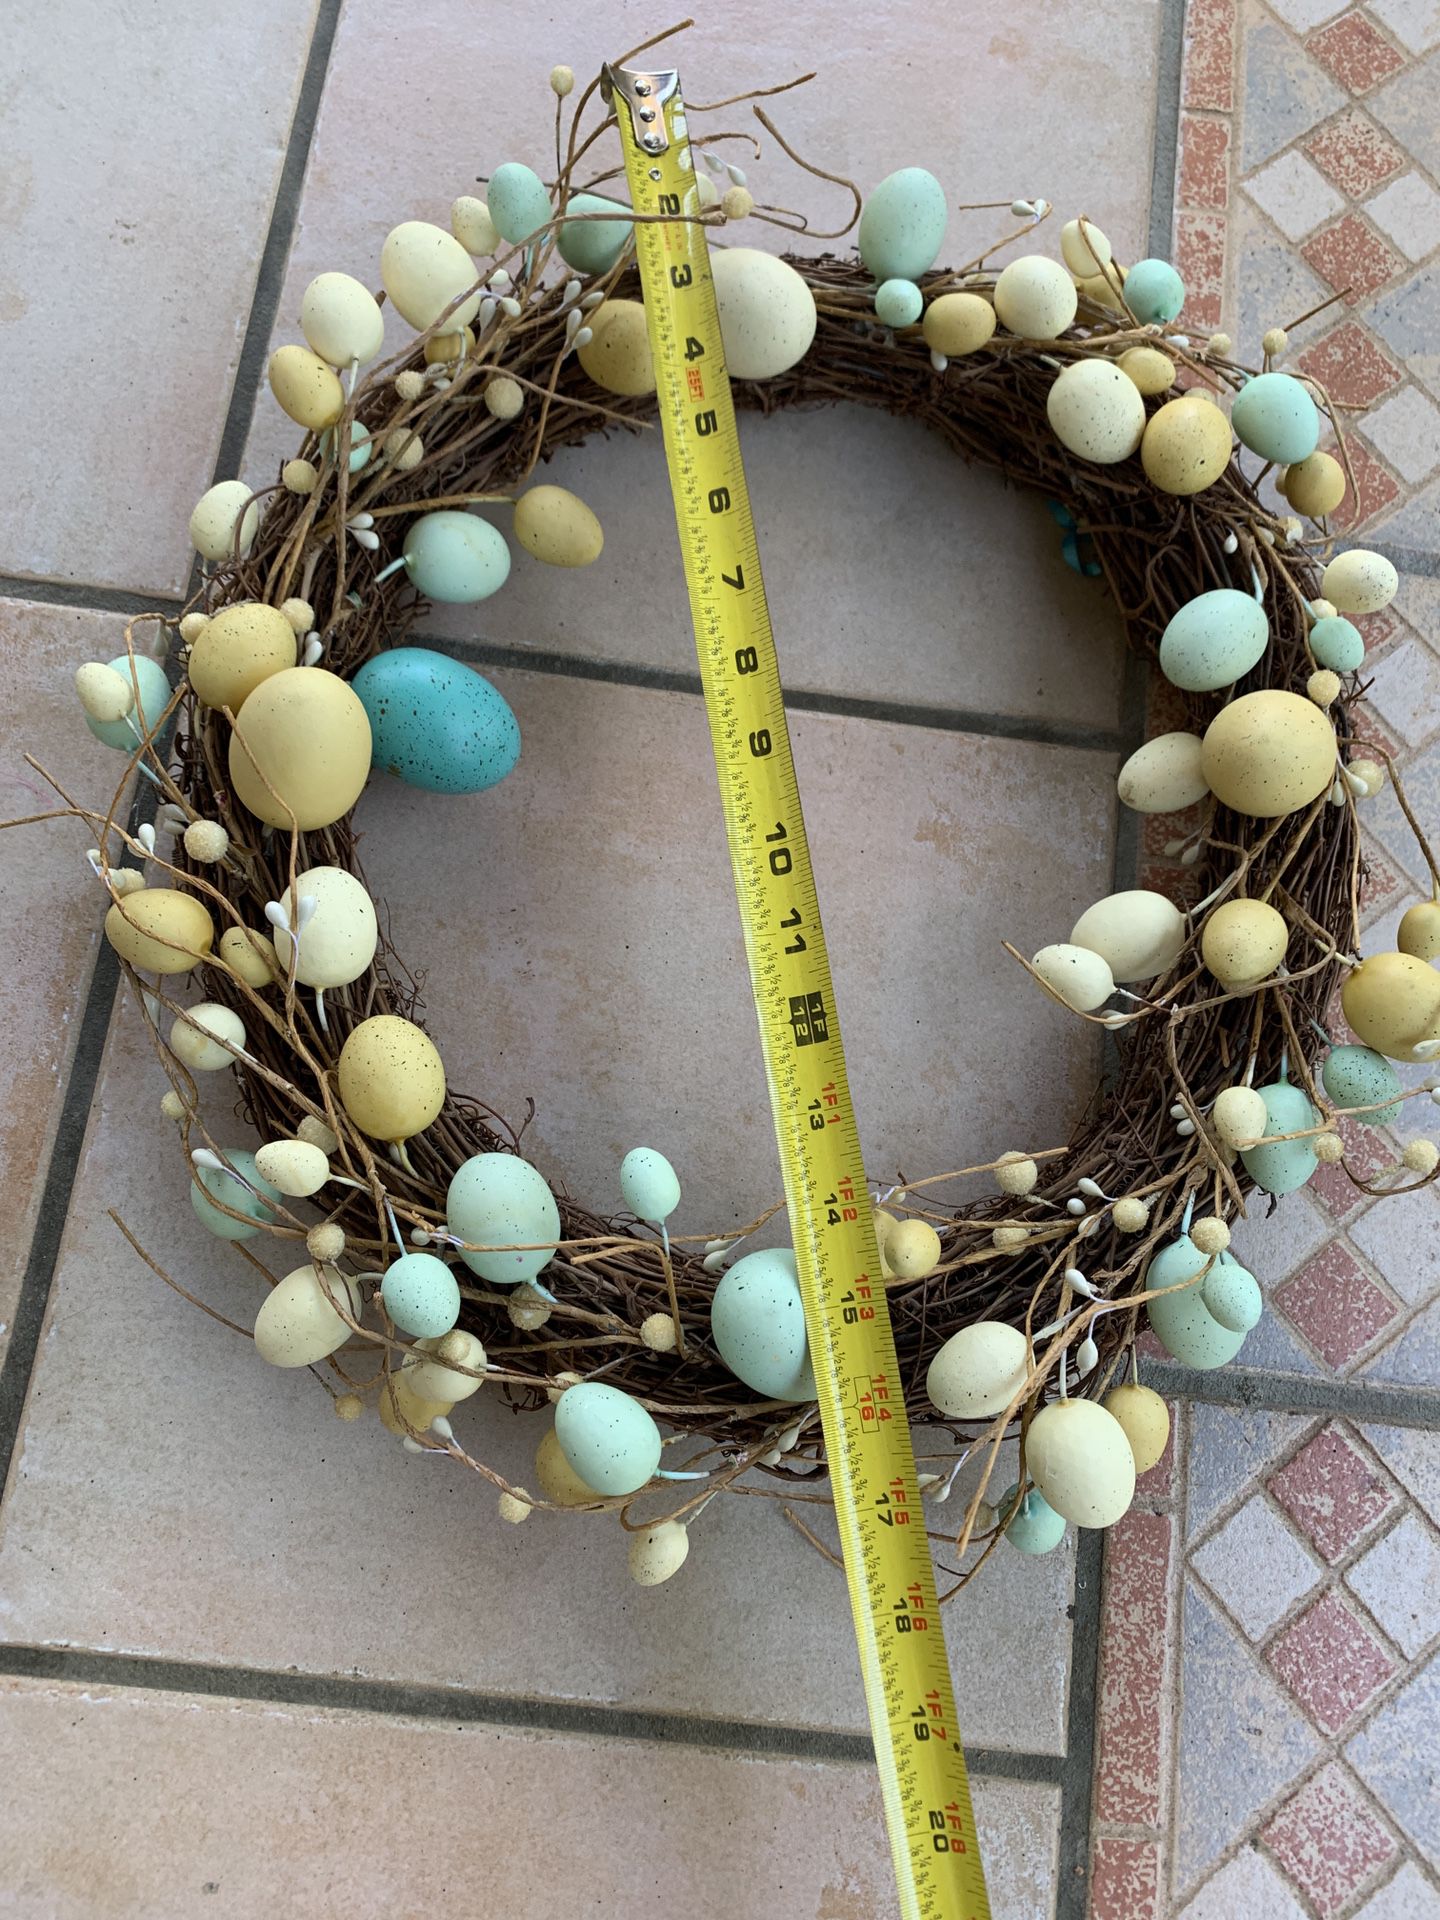 Decorative Easter Wreaths 